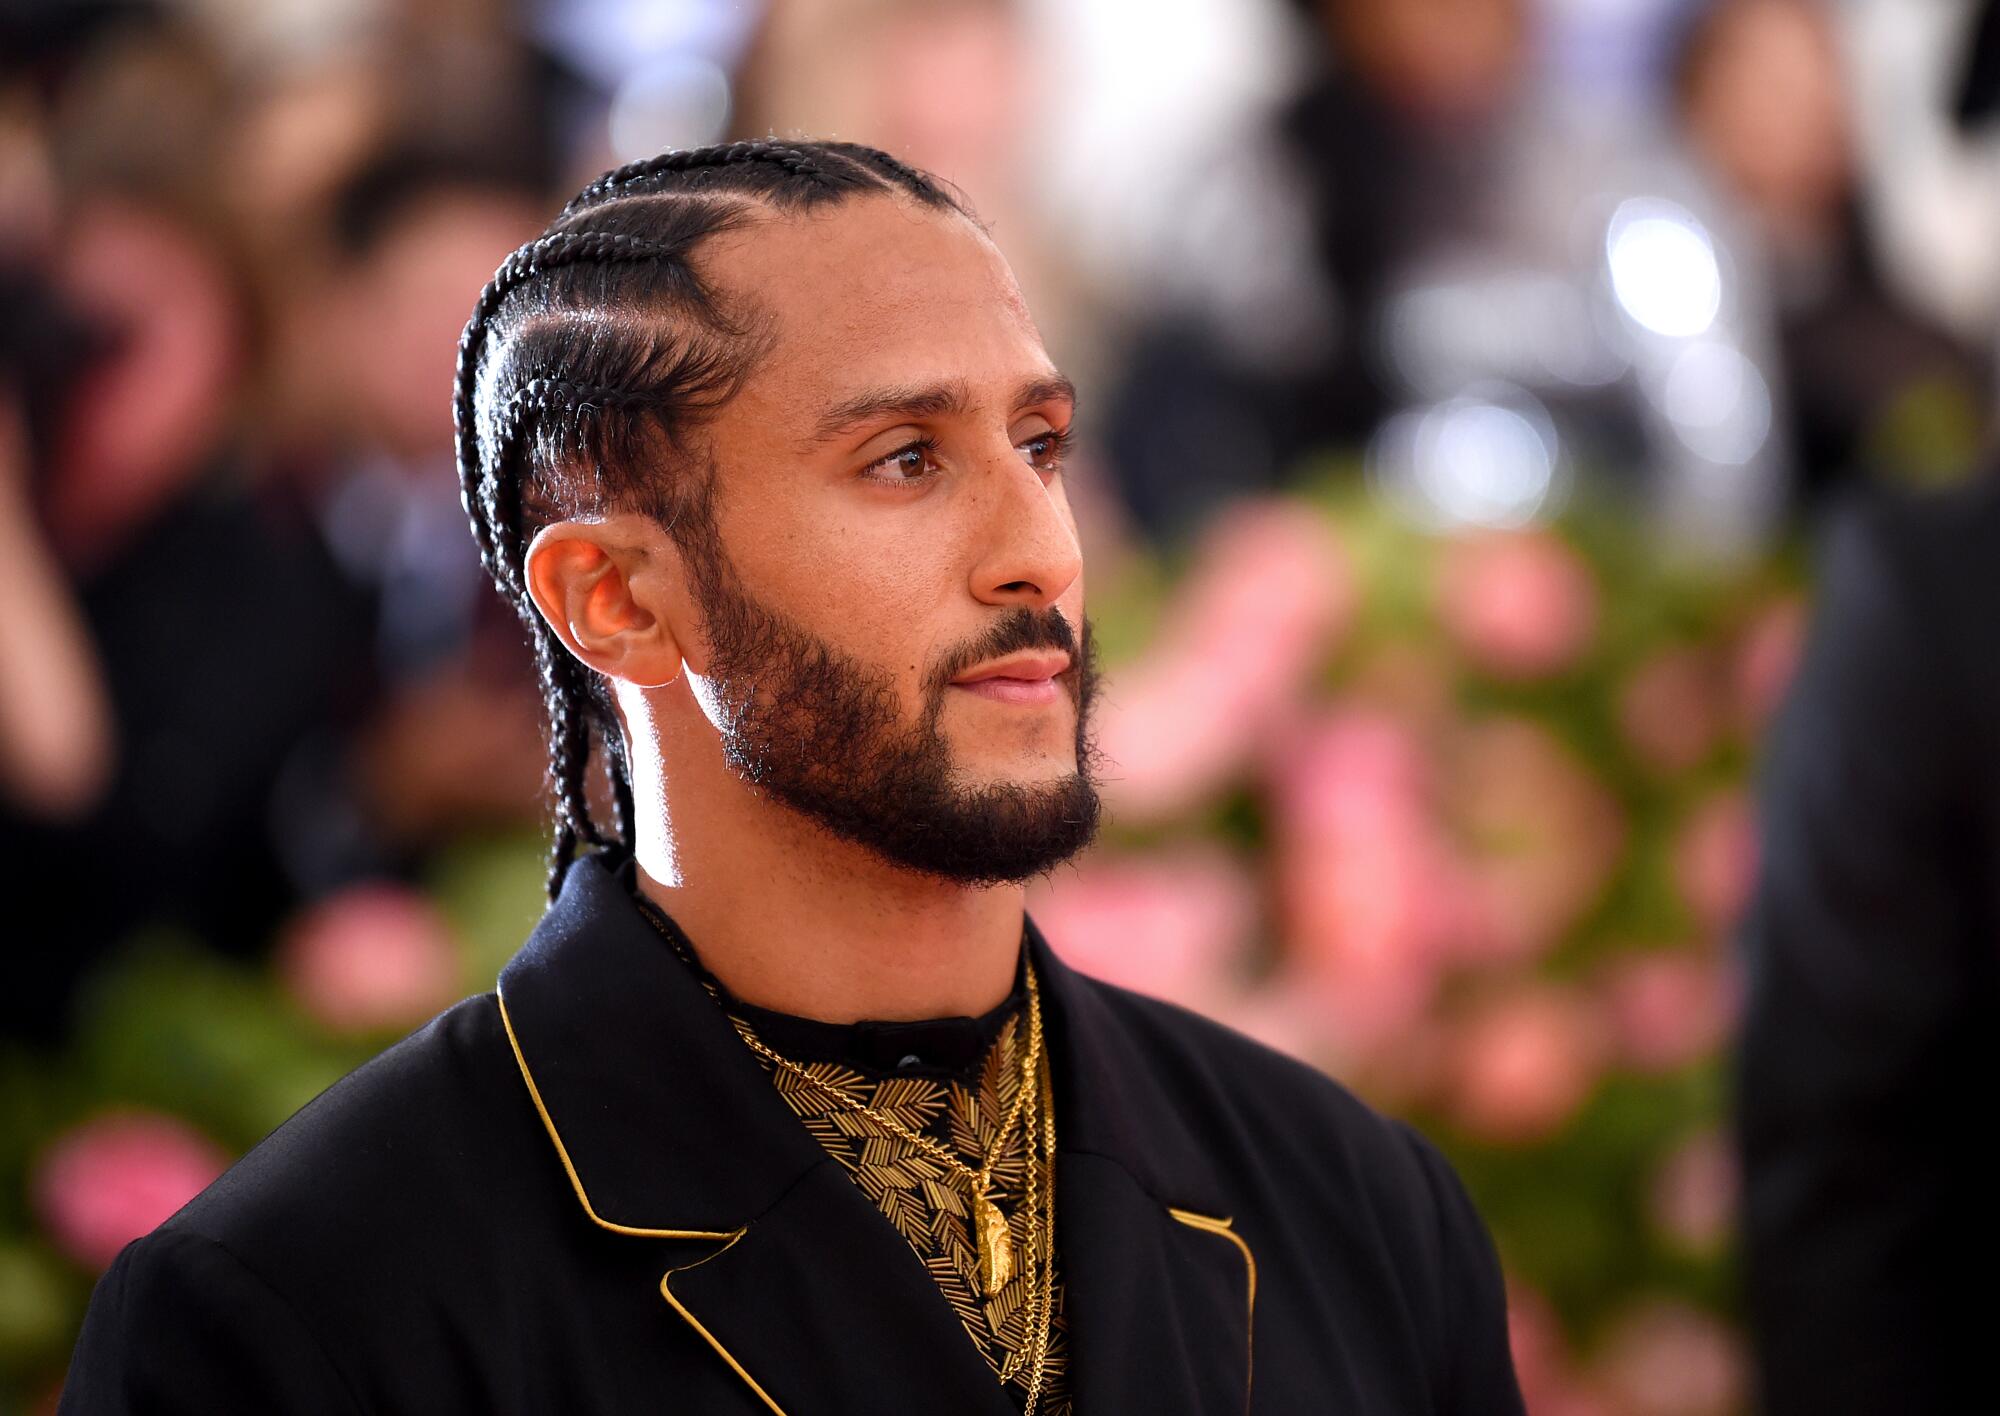 A man with braided hair and a beard posing in a black and gold suit